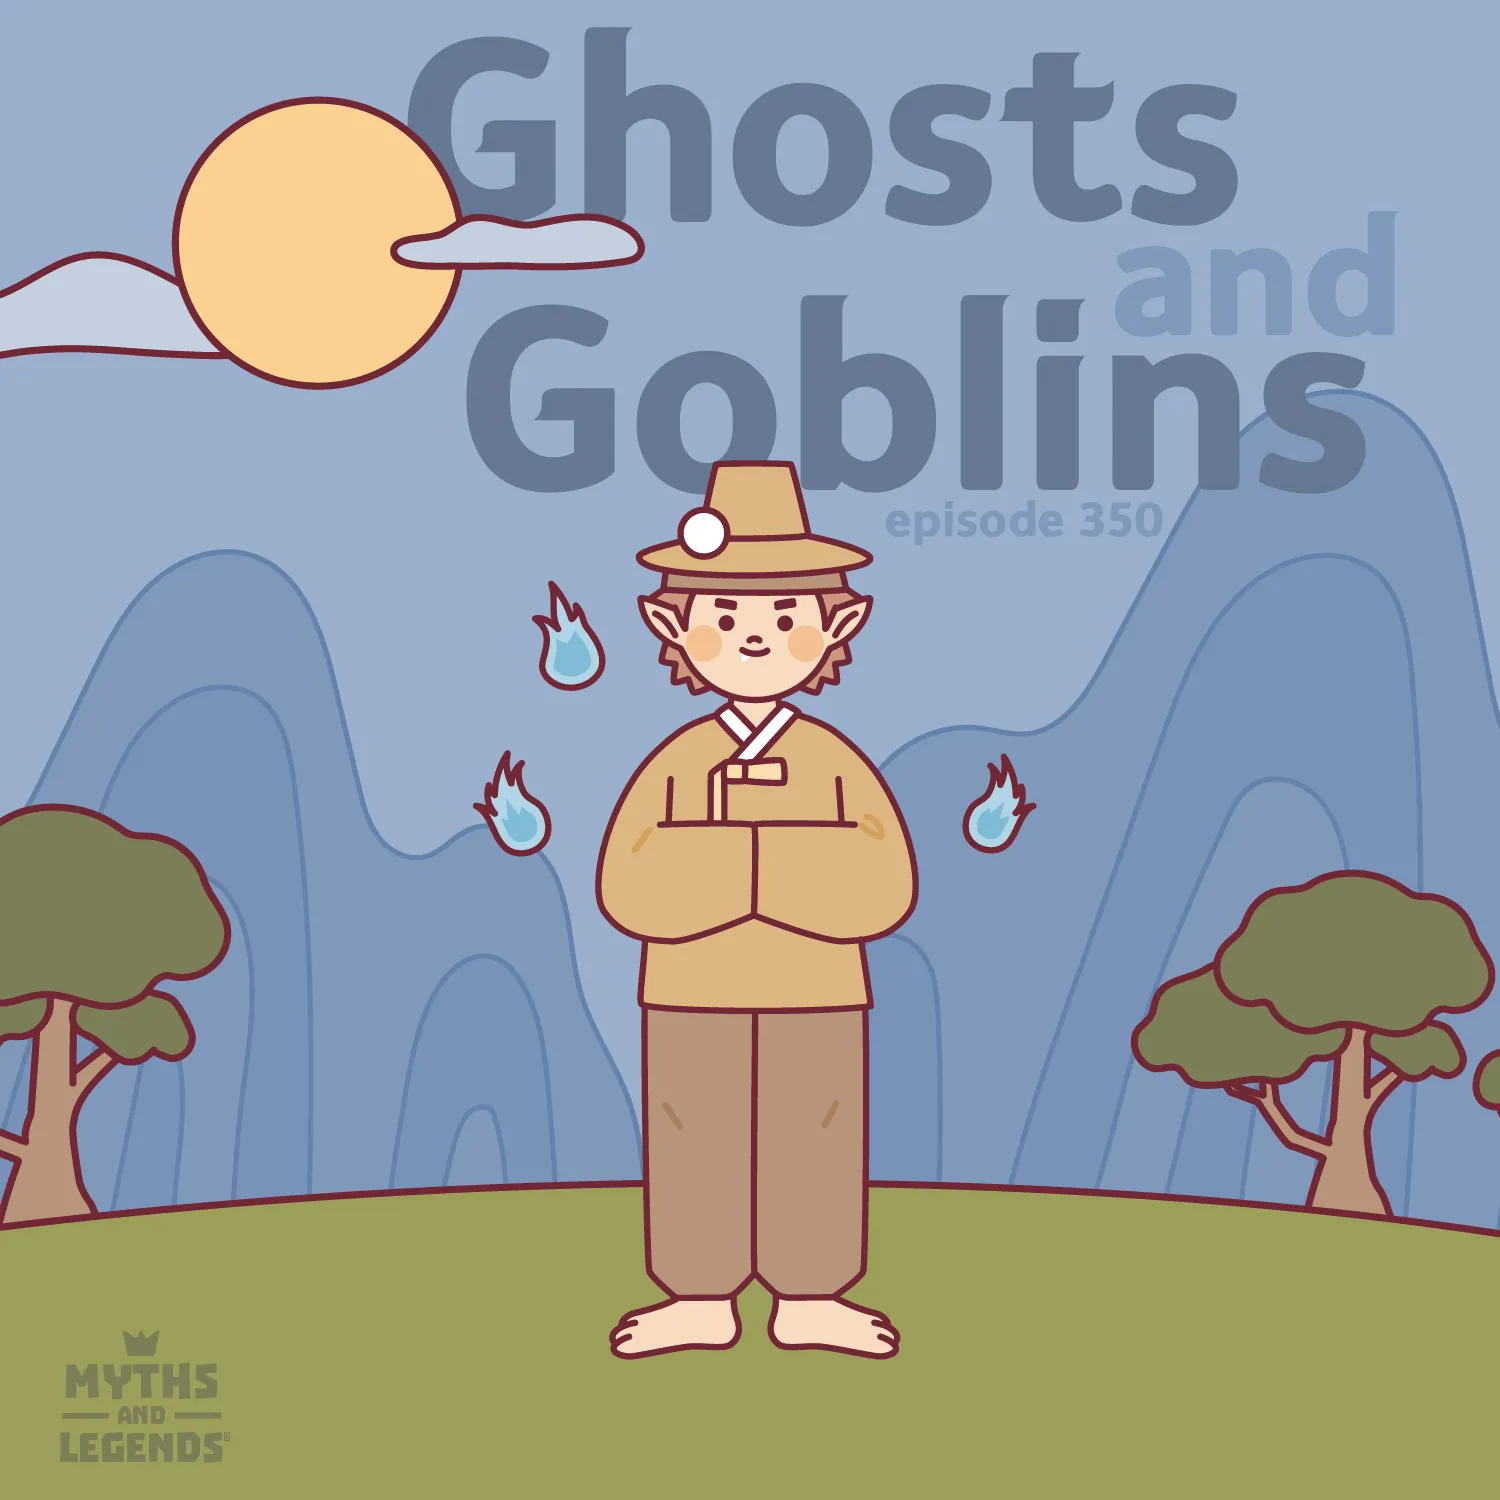 The image is a cartoon-style cover art for an episode titled "Ghosts and Goblins", featuring a Korean folklore theme. It shows a smiling character in traditional Korean clothing, with a hat and crossed arms, standing among blue flames, possibly representing spirits, against a hilly backdrop with stylized trees and an oversized sun. The title is prominently displayed above the character, with a "MYTHS AND LEGENDS" logo at the bottom left.